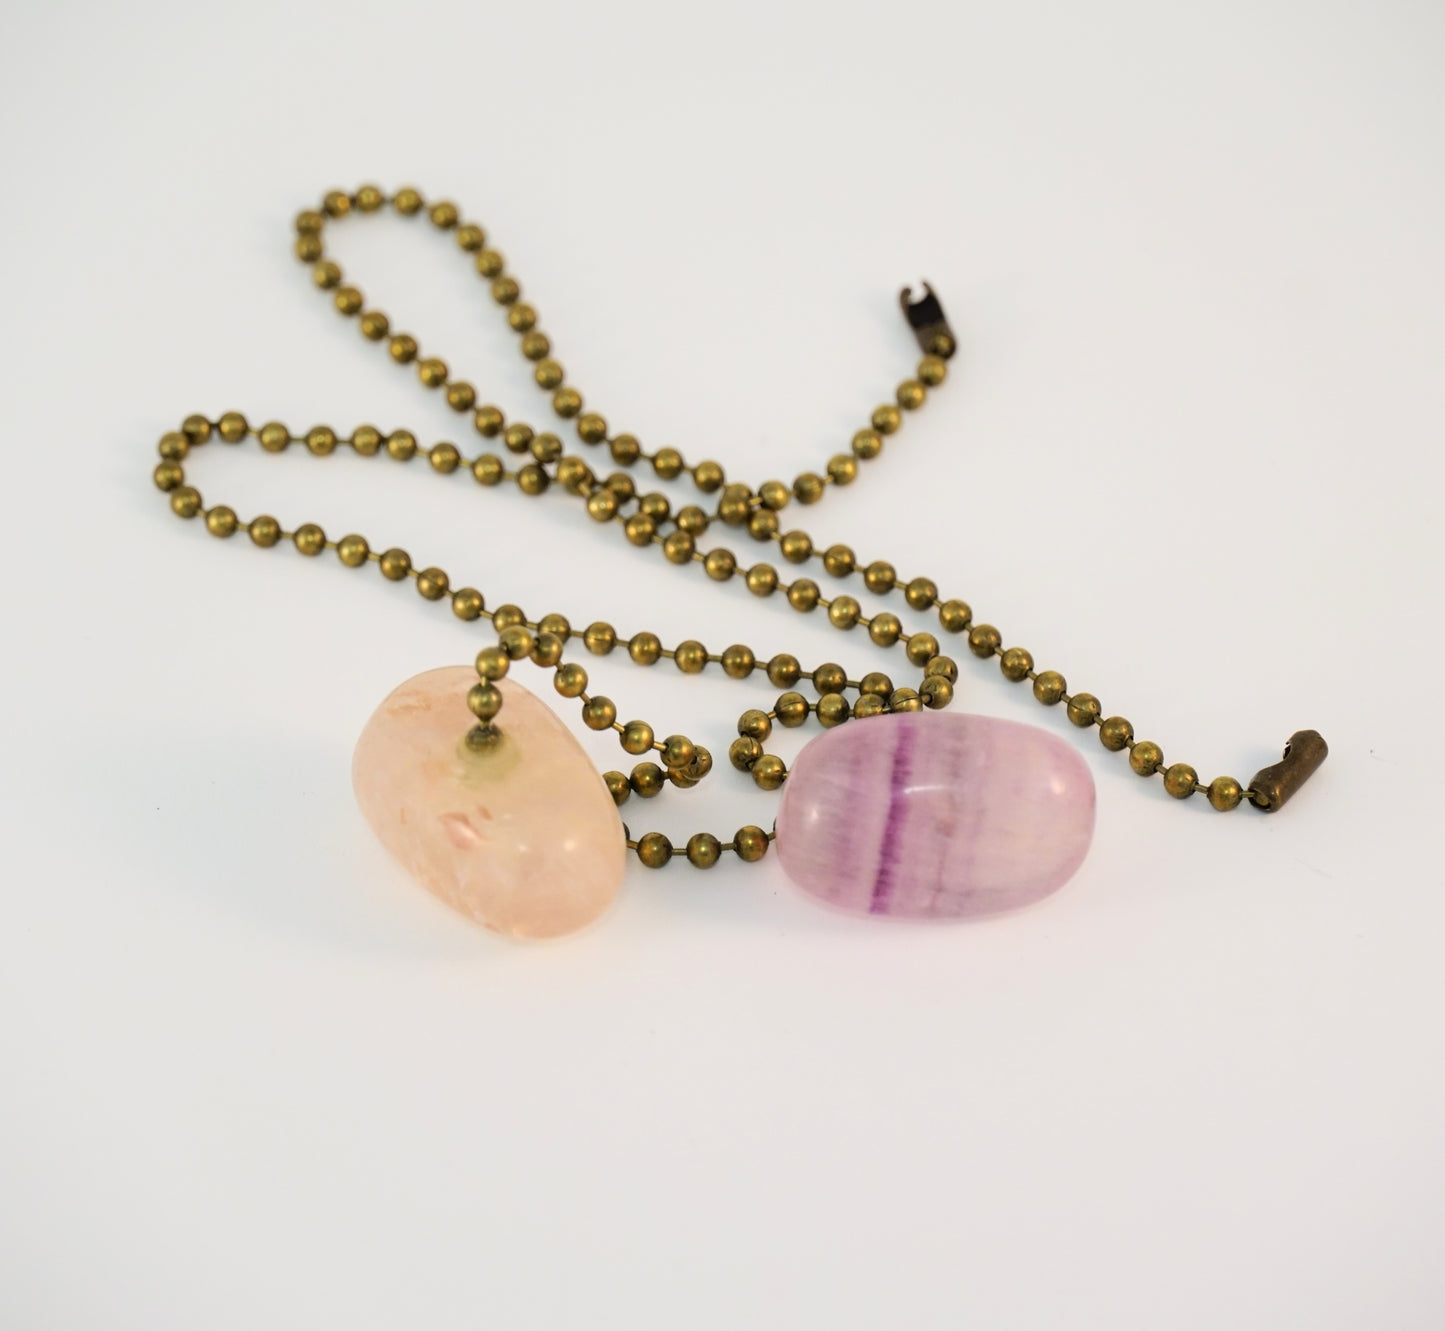 Light and Fan Pulls with Tumbled Fluorite Gemstones